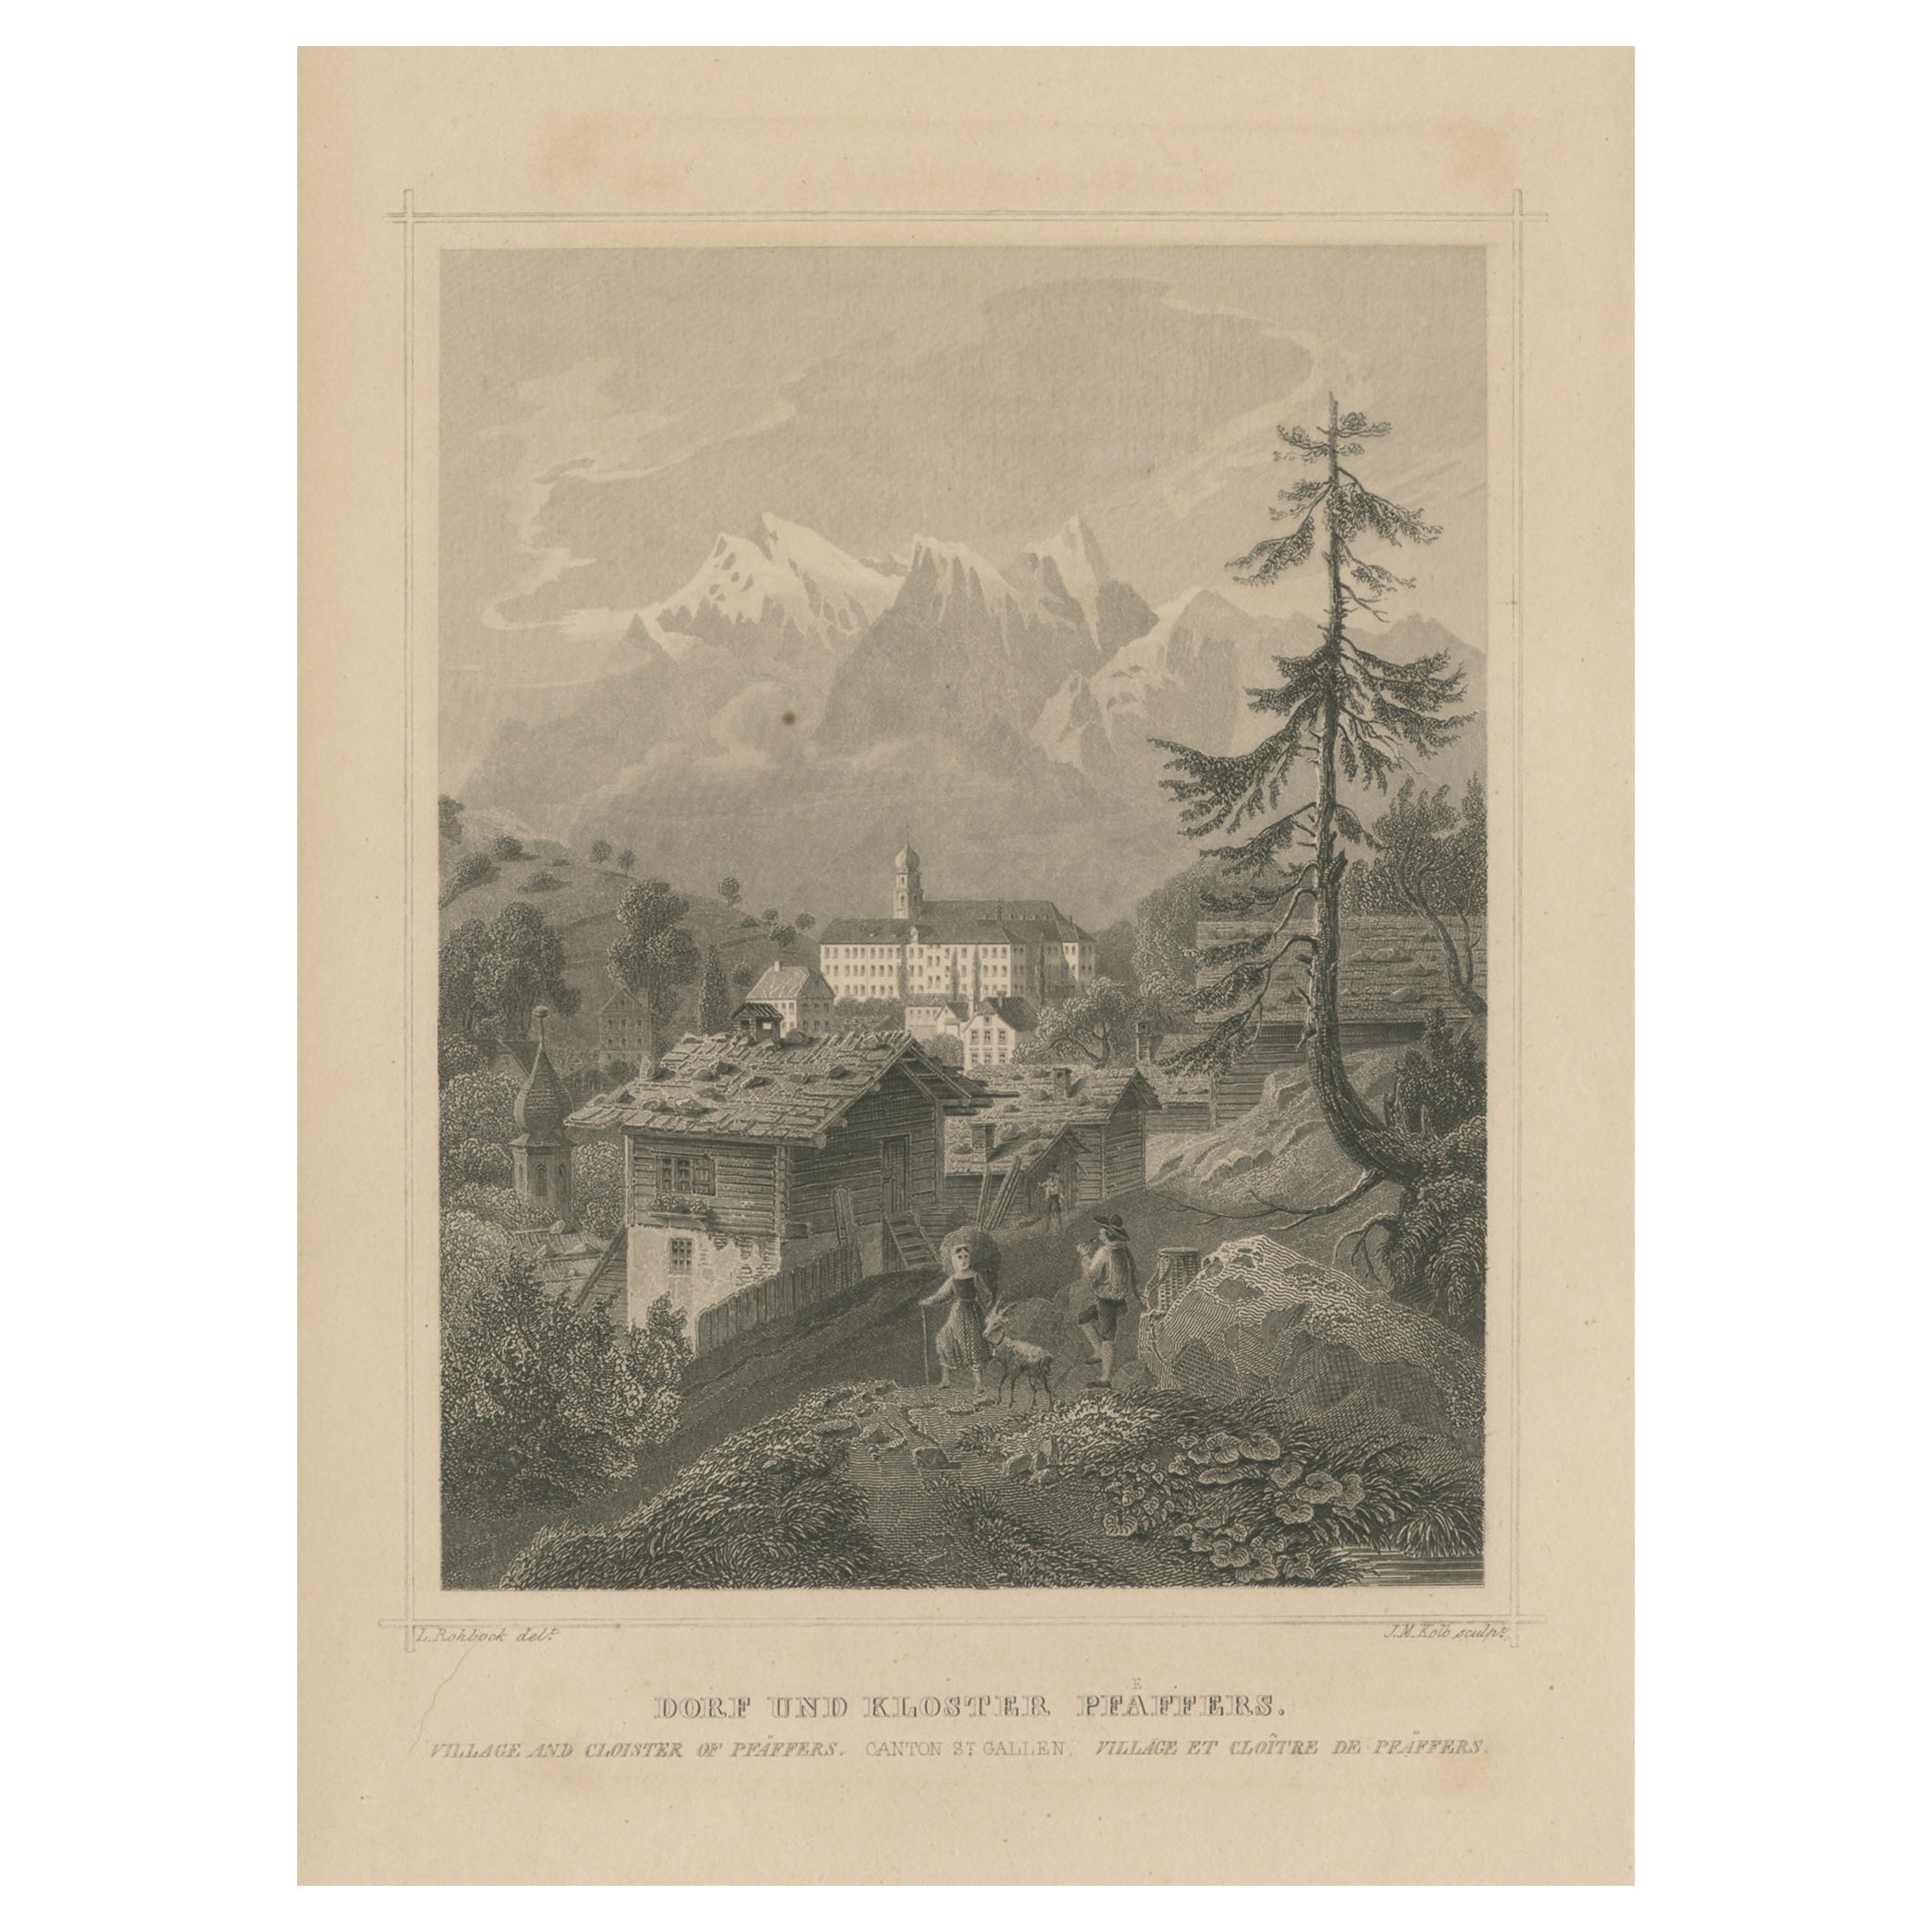 Antique Print of the Village and Monastery of Pfäfers, Switzerland